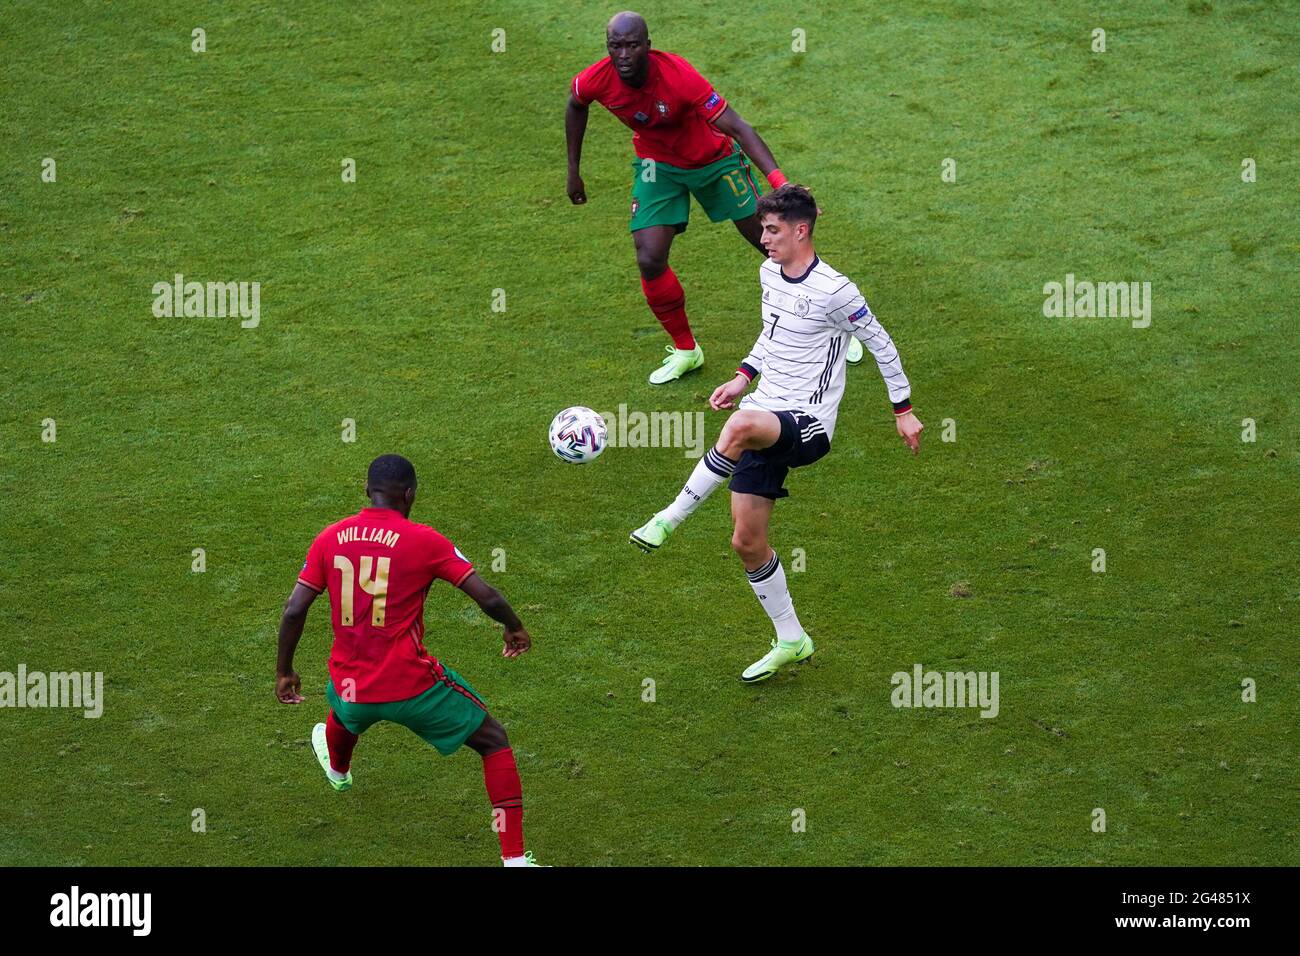 MUNCHEN, GERMANY - JUNE 19: Kai Havertz of Germany battles for possession with William Carvalho of Portugal and Danilo of Portugal during the UEFA Euro 2020 Group F match between Portugal and Germany at Allianz Arena on June 19, 2021 in Munchen, Germany (Photo by Andre Weening/Orange Pictures) Stock Photo